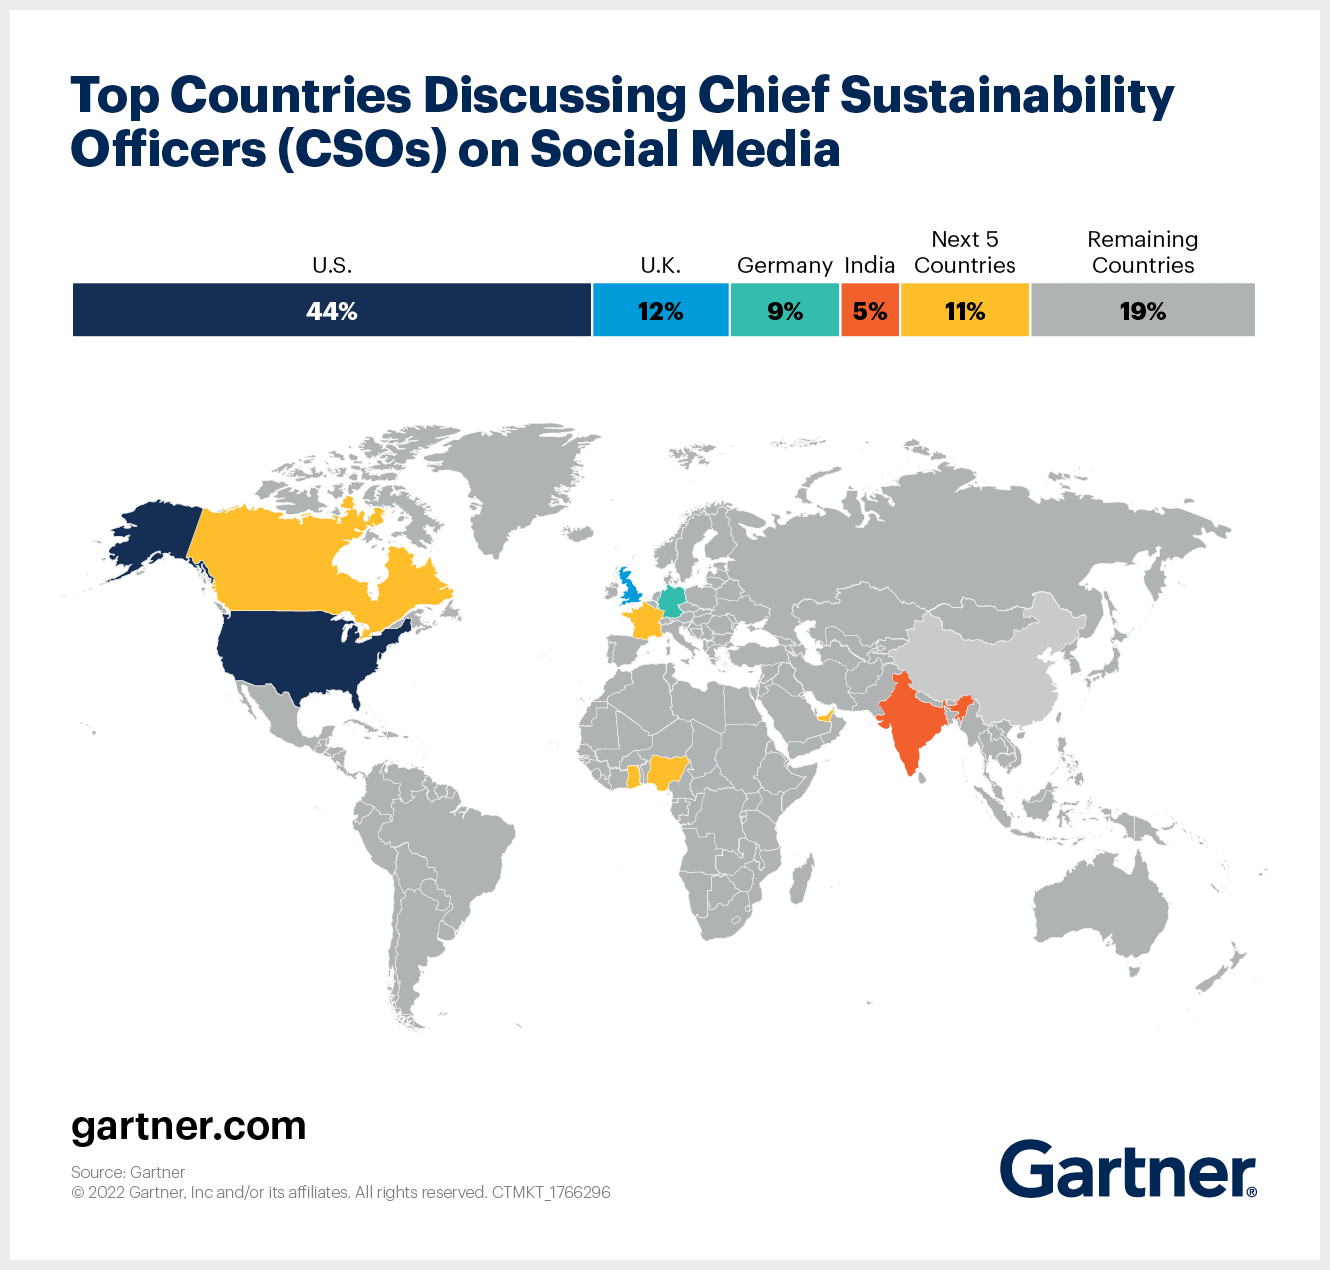 Top Countries Discussing Chief Sustainability Officers (CSOs) on Social Media